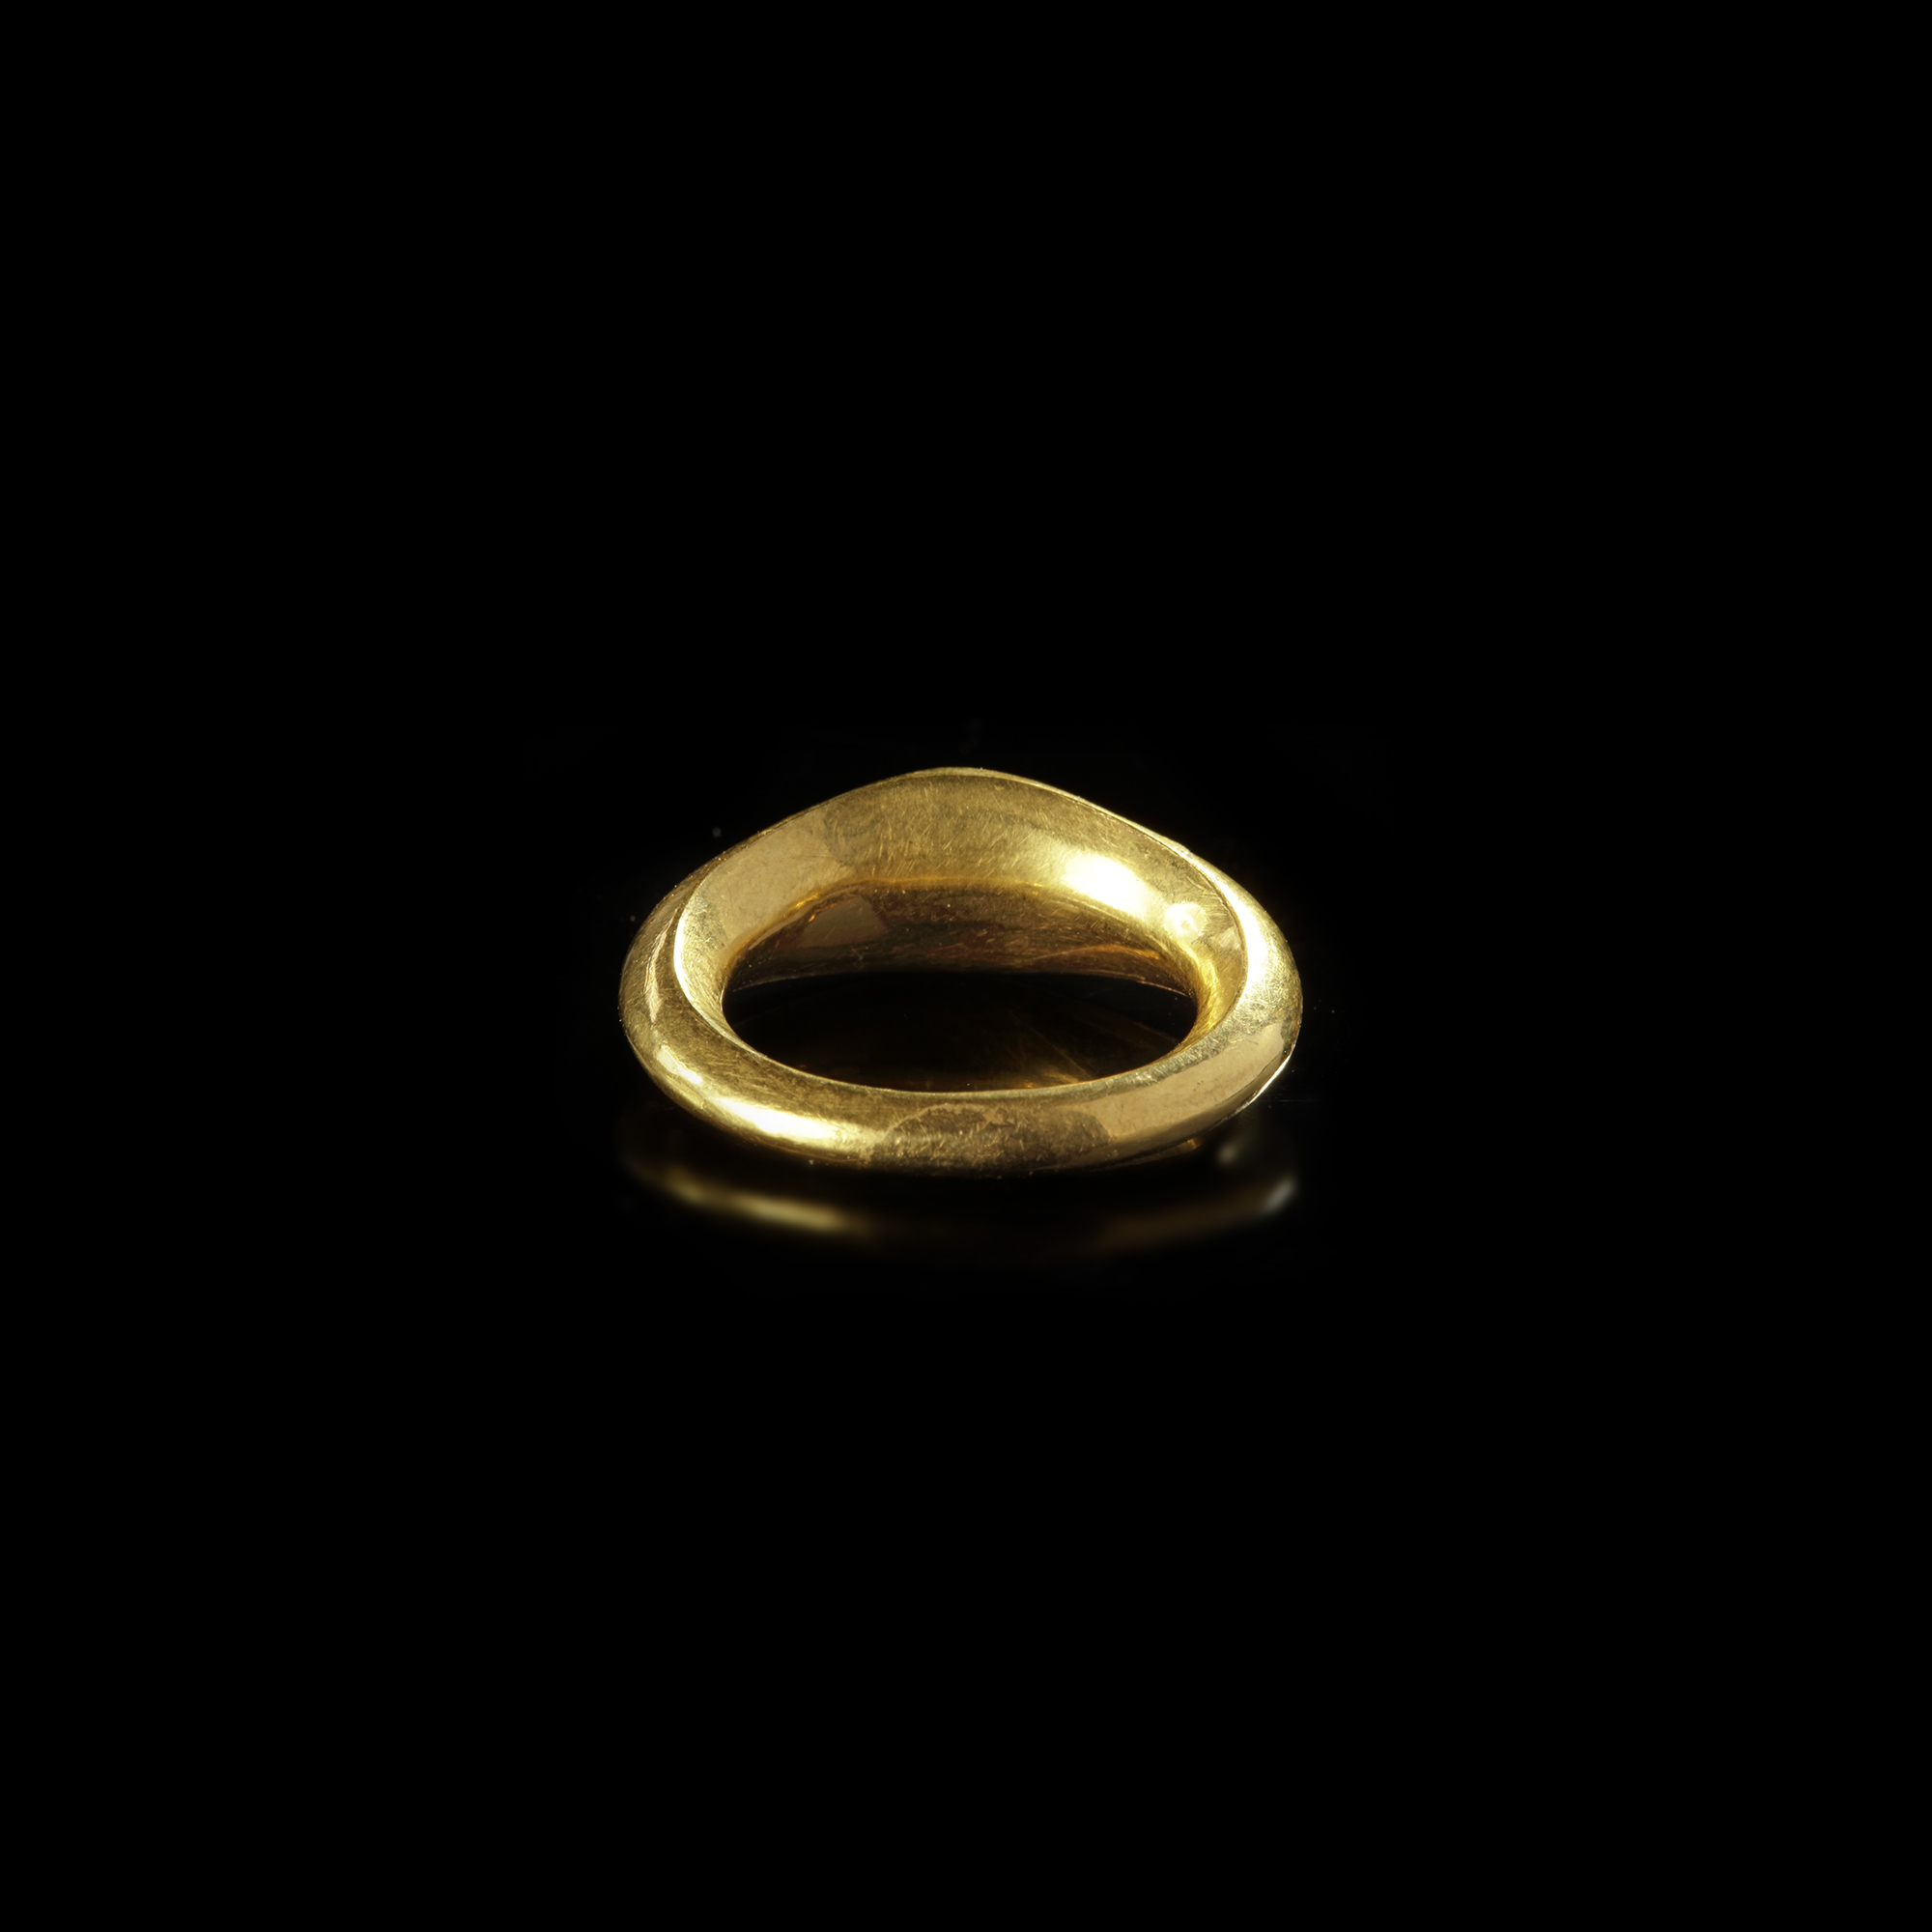 A ROMAN GOLD RING WITH AN INTAGLIO OF A HORSE, 1ST CENTURY AD - Image 3 of 3